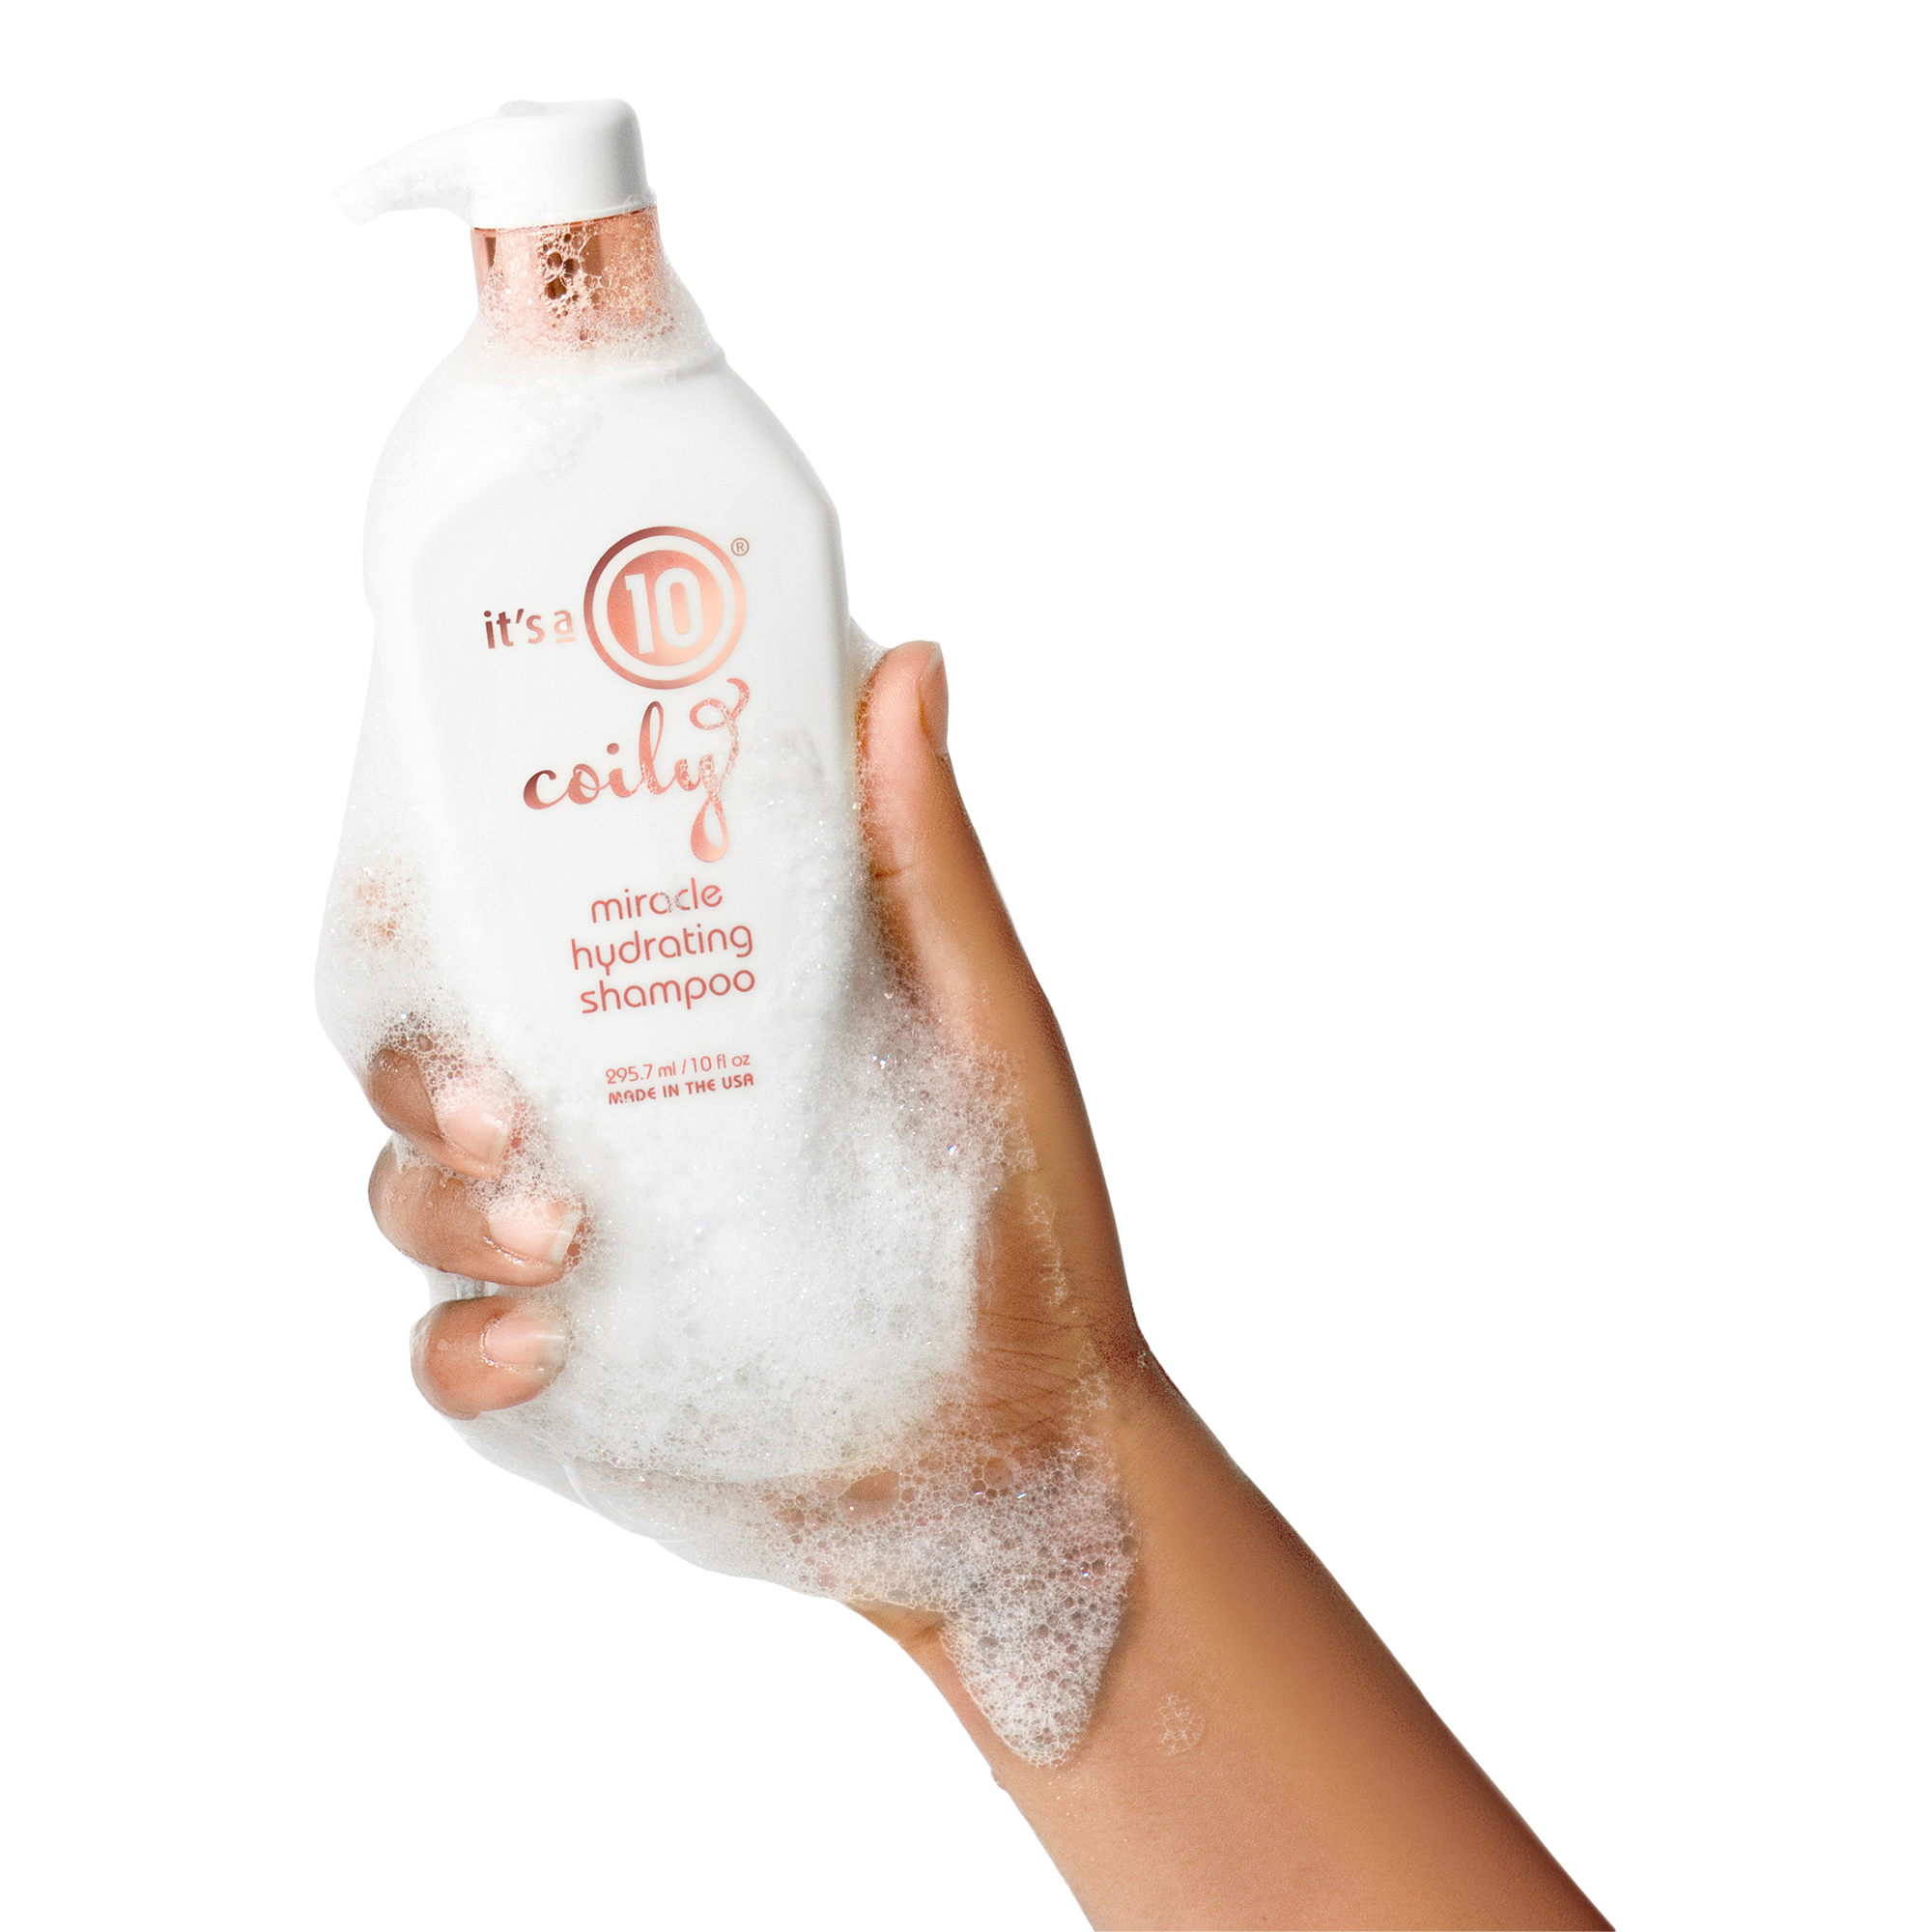 It's A 10 Coily Miracle Hydrating Shampoo / 10OZ